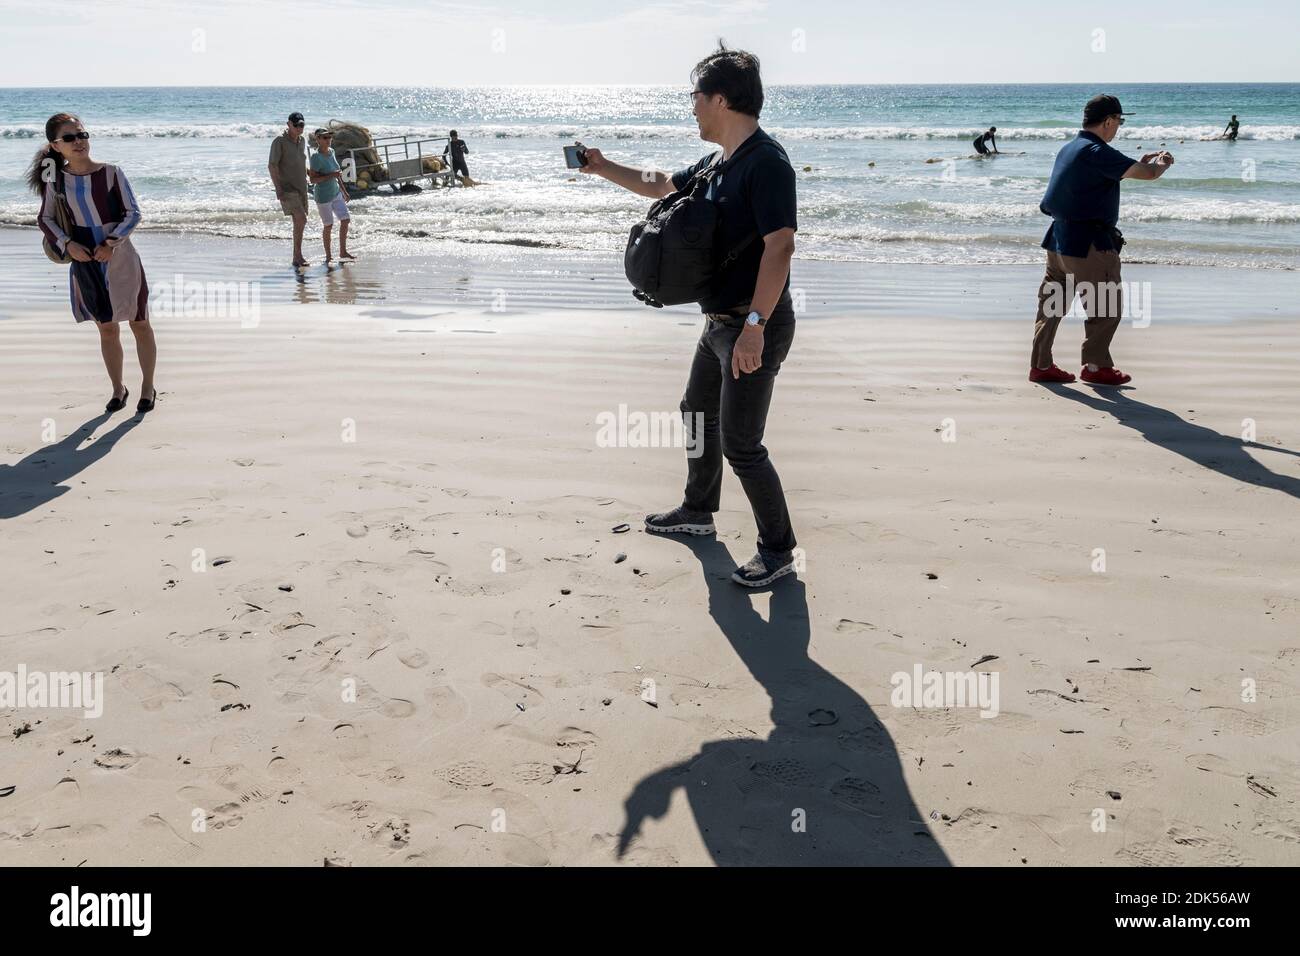 Chinese tourists take photos on Fish Hoek Beach, Cape Town, South Africa. Shark Spotters deploy shark exclusion barrier in ocean in background. Stock Photo